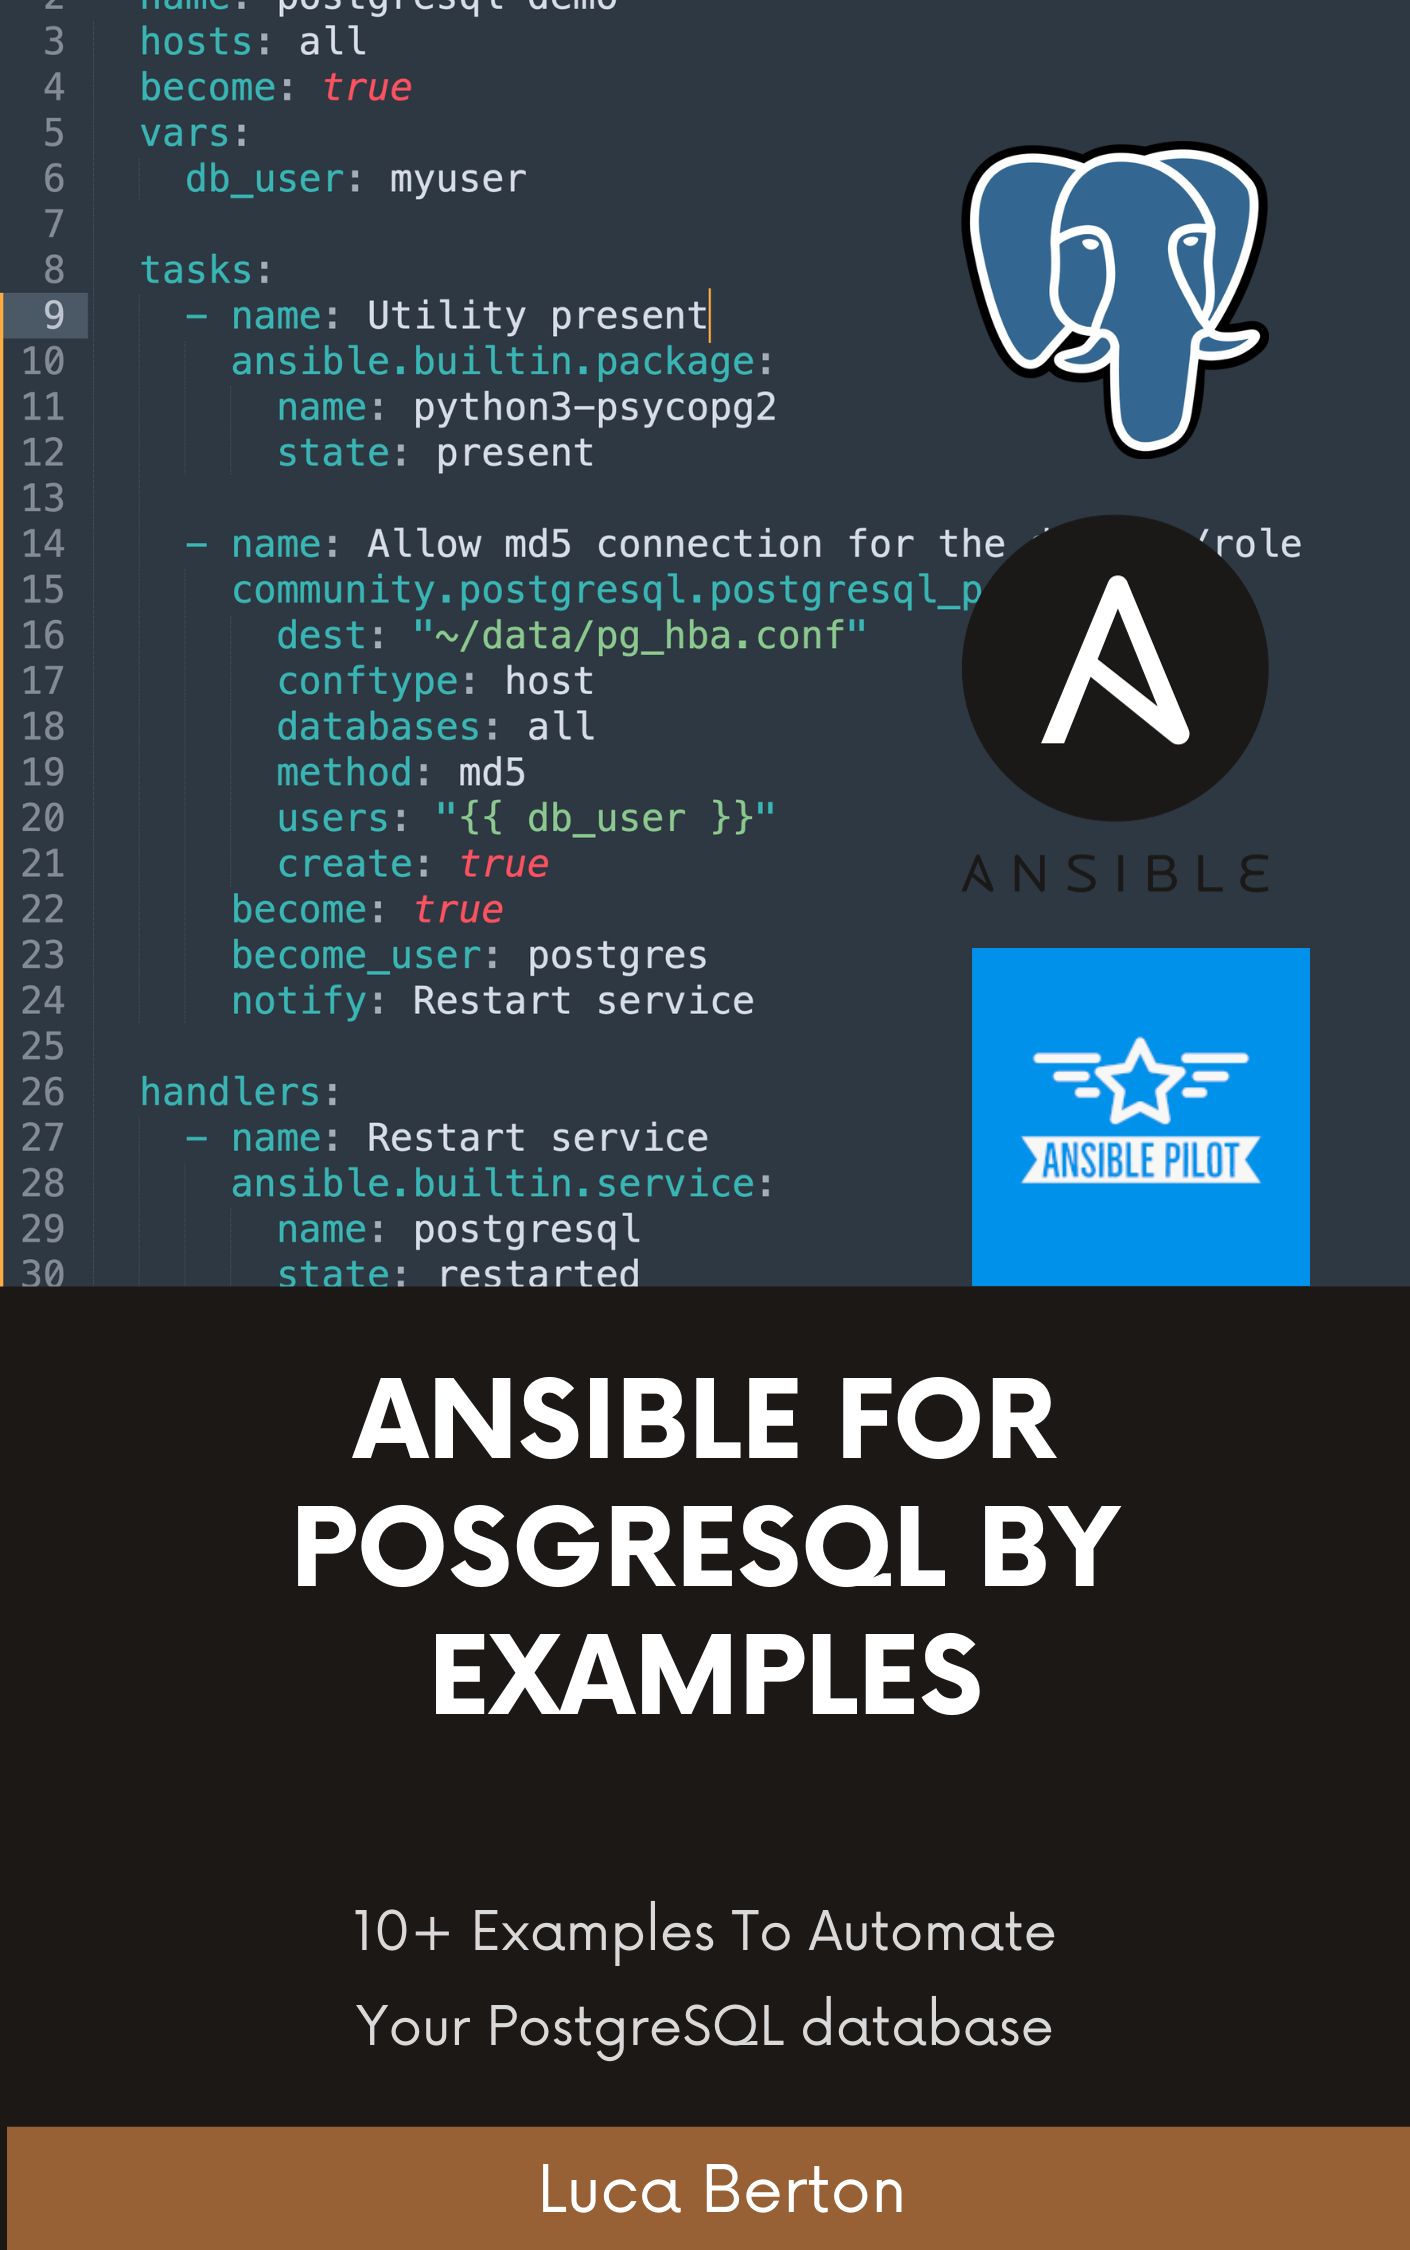 Ansible For PostgreSQL by Examples: 10+ Examples To Automate Your PostgreSQL database